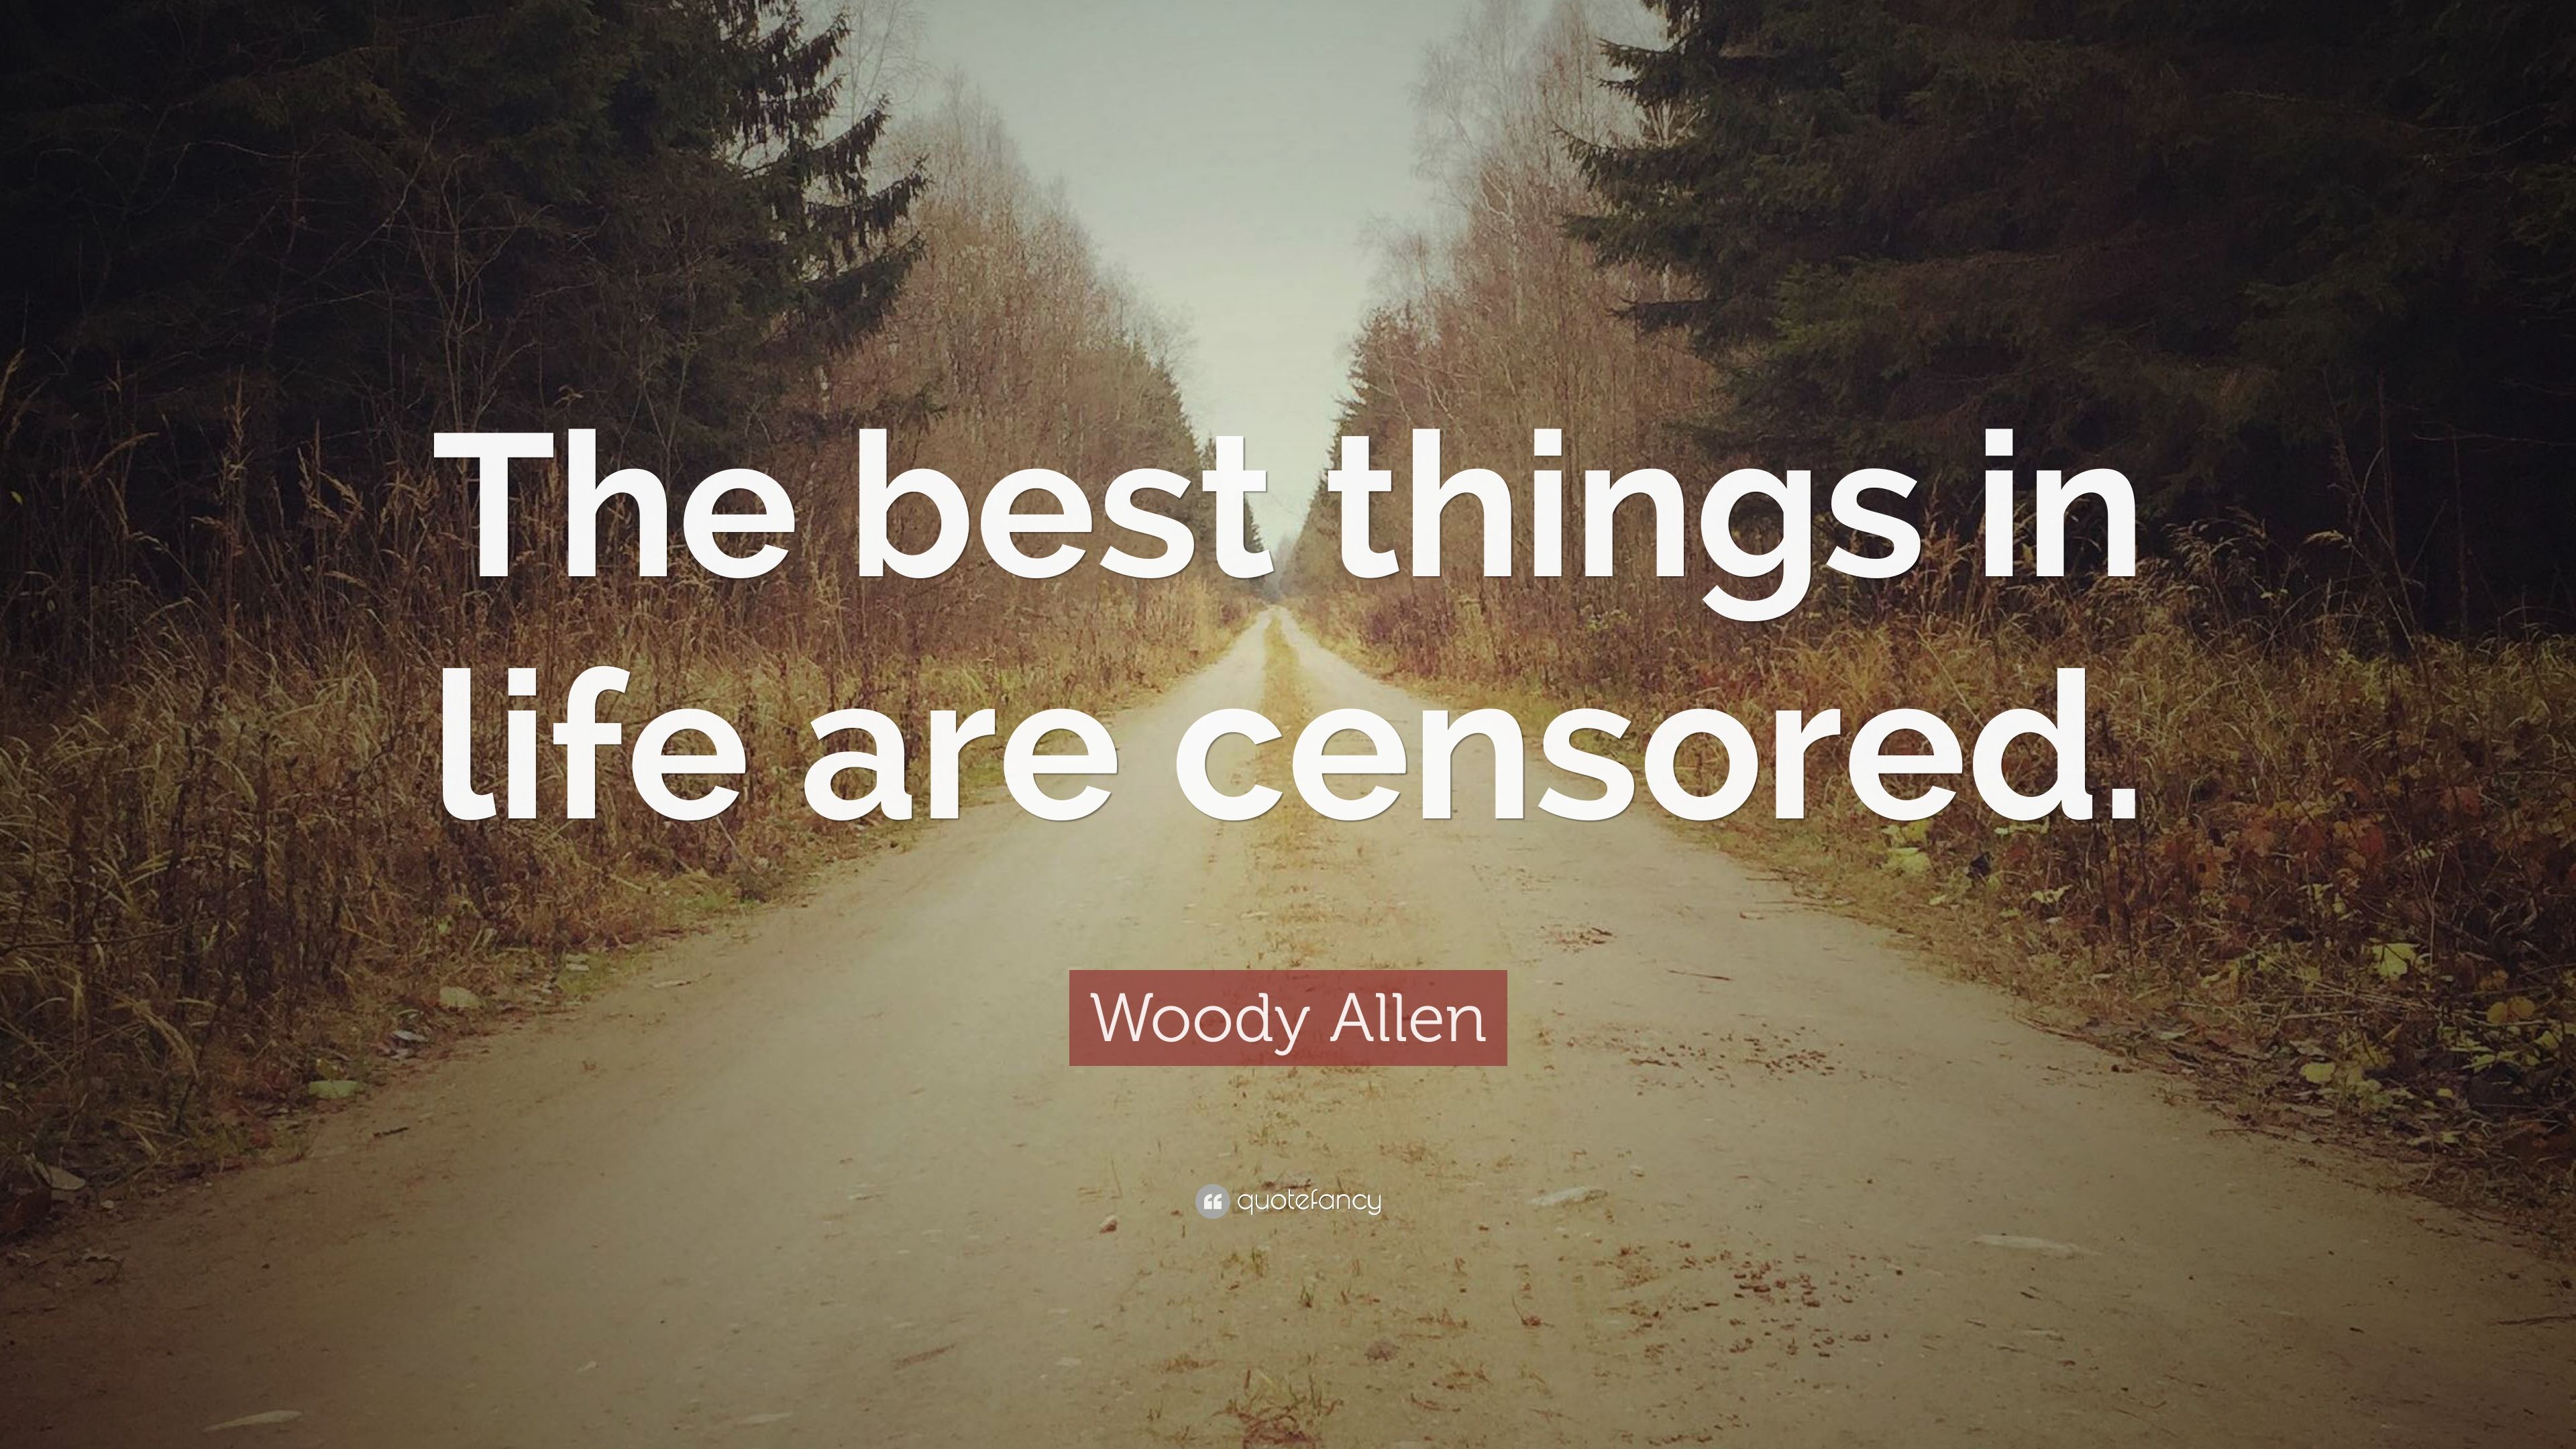 Woody Allen Quote: “The best things in life are censored.” (9 wallpaper)